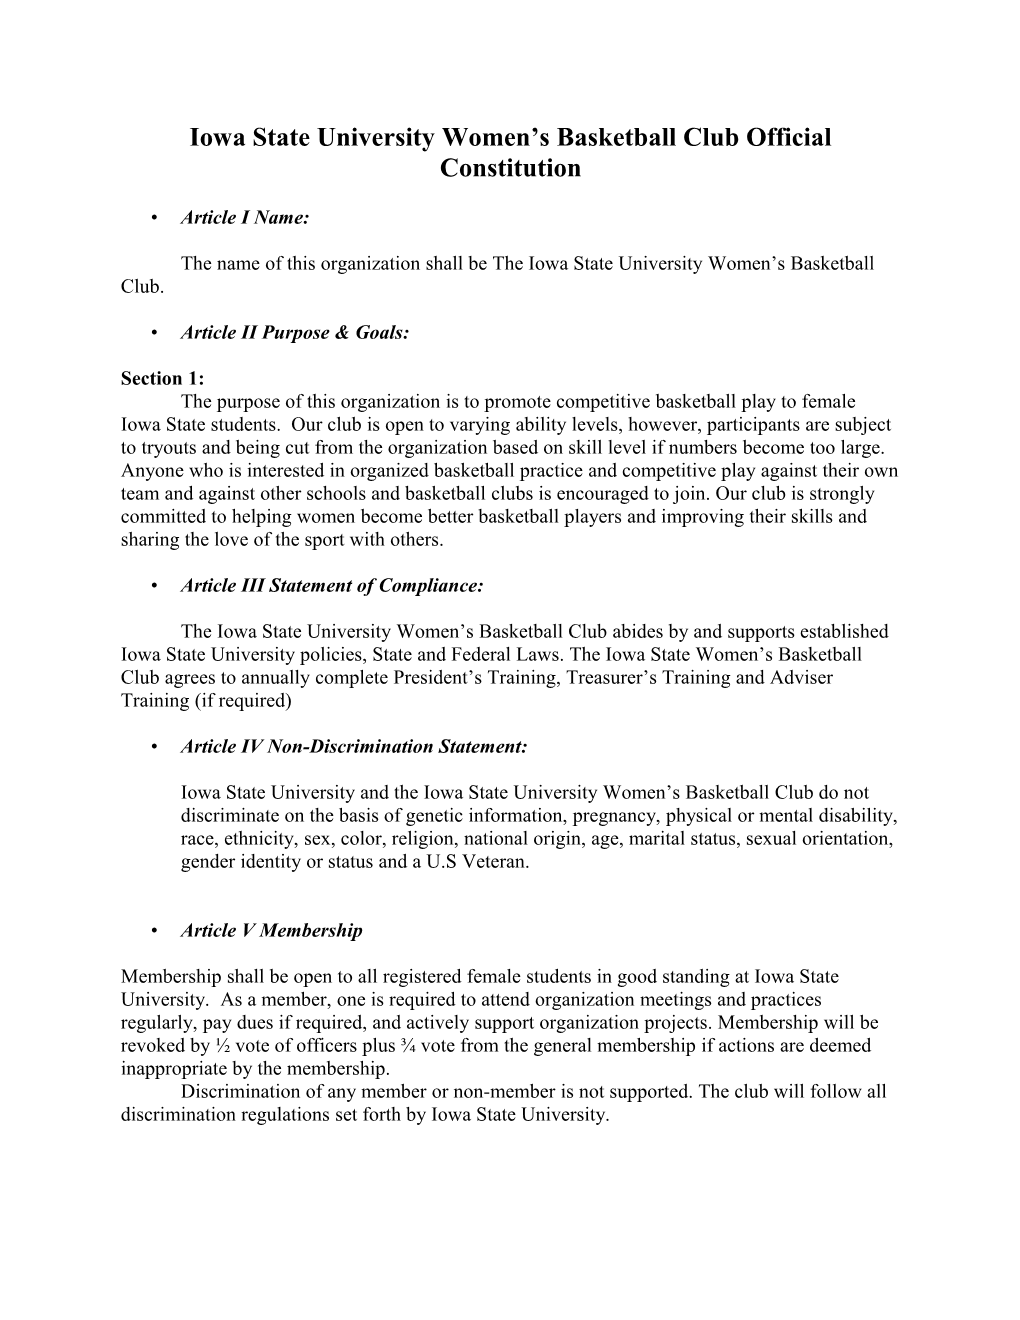 Iowa State University Women S Basketball Club Official Constitution